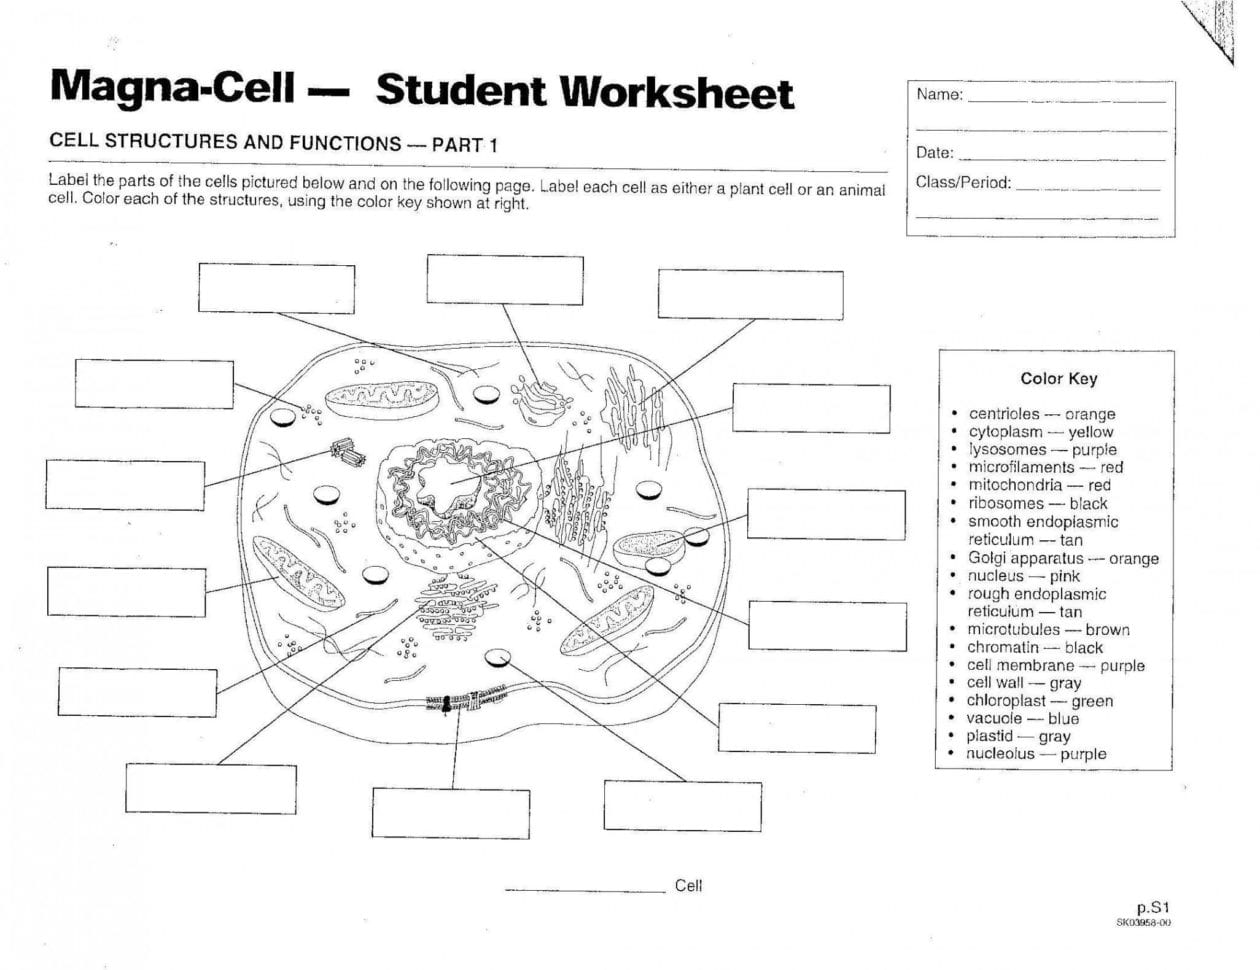 coloring-coloring-plant-cell-answer-key-beautiful-model-db-excel